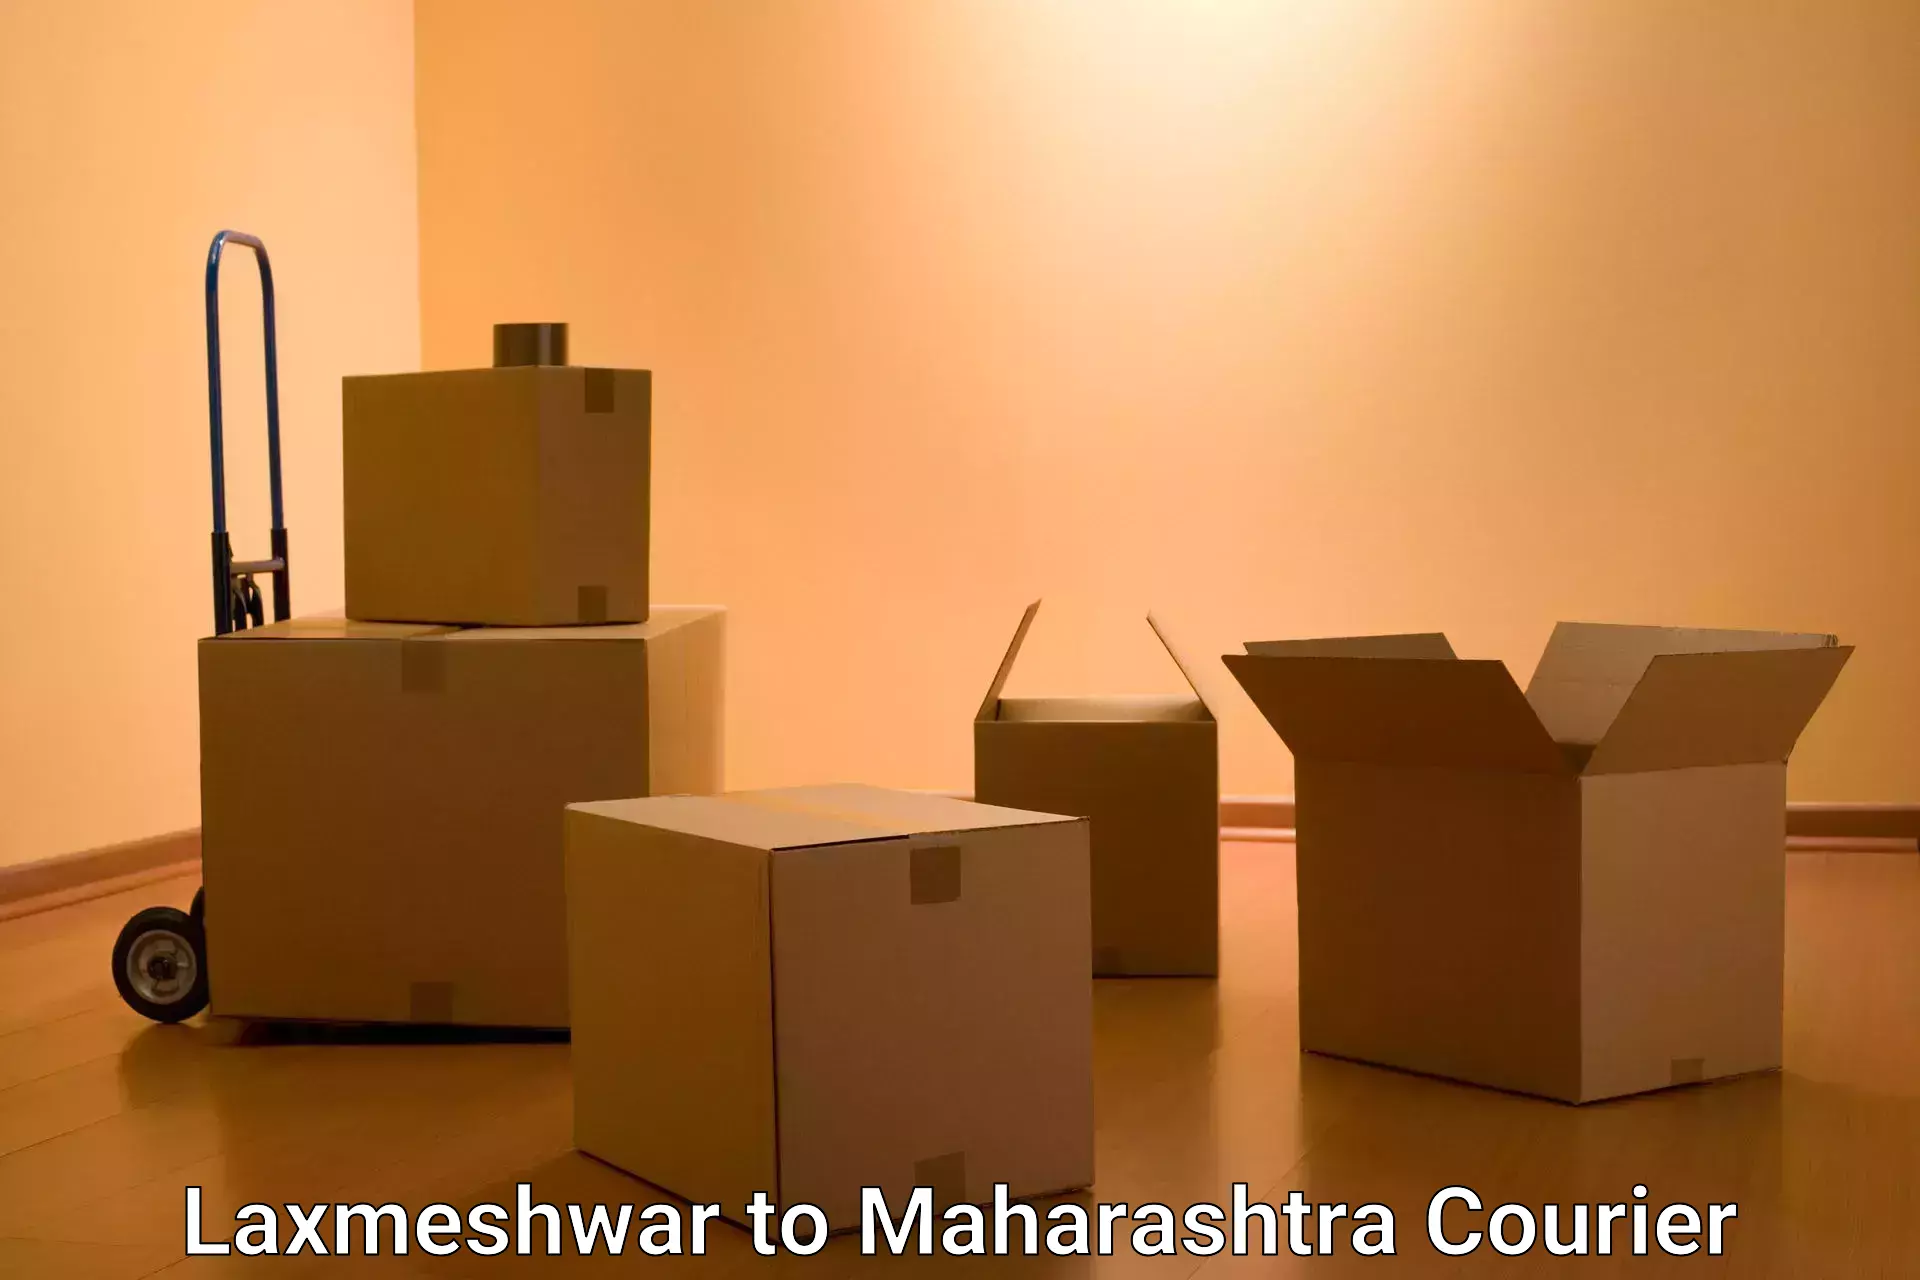 Courier service efficiency in Laxmeshwar to Ahmednagar